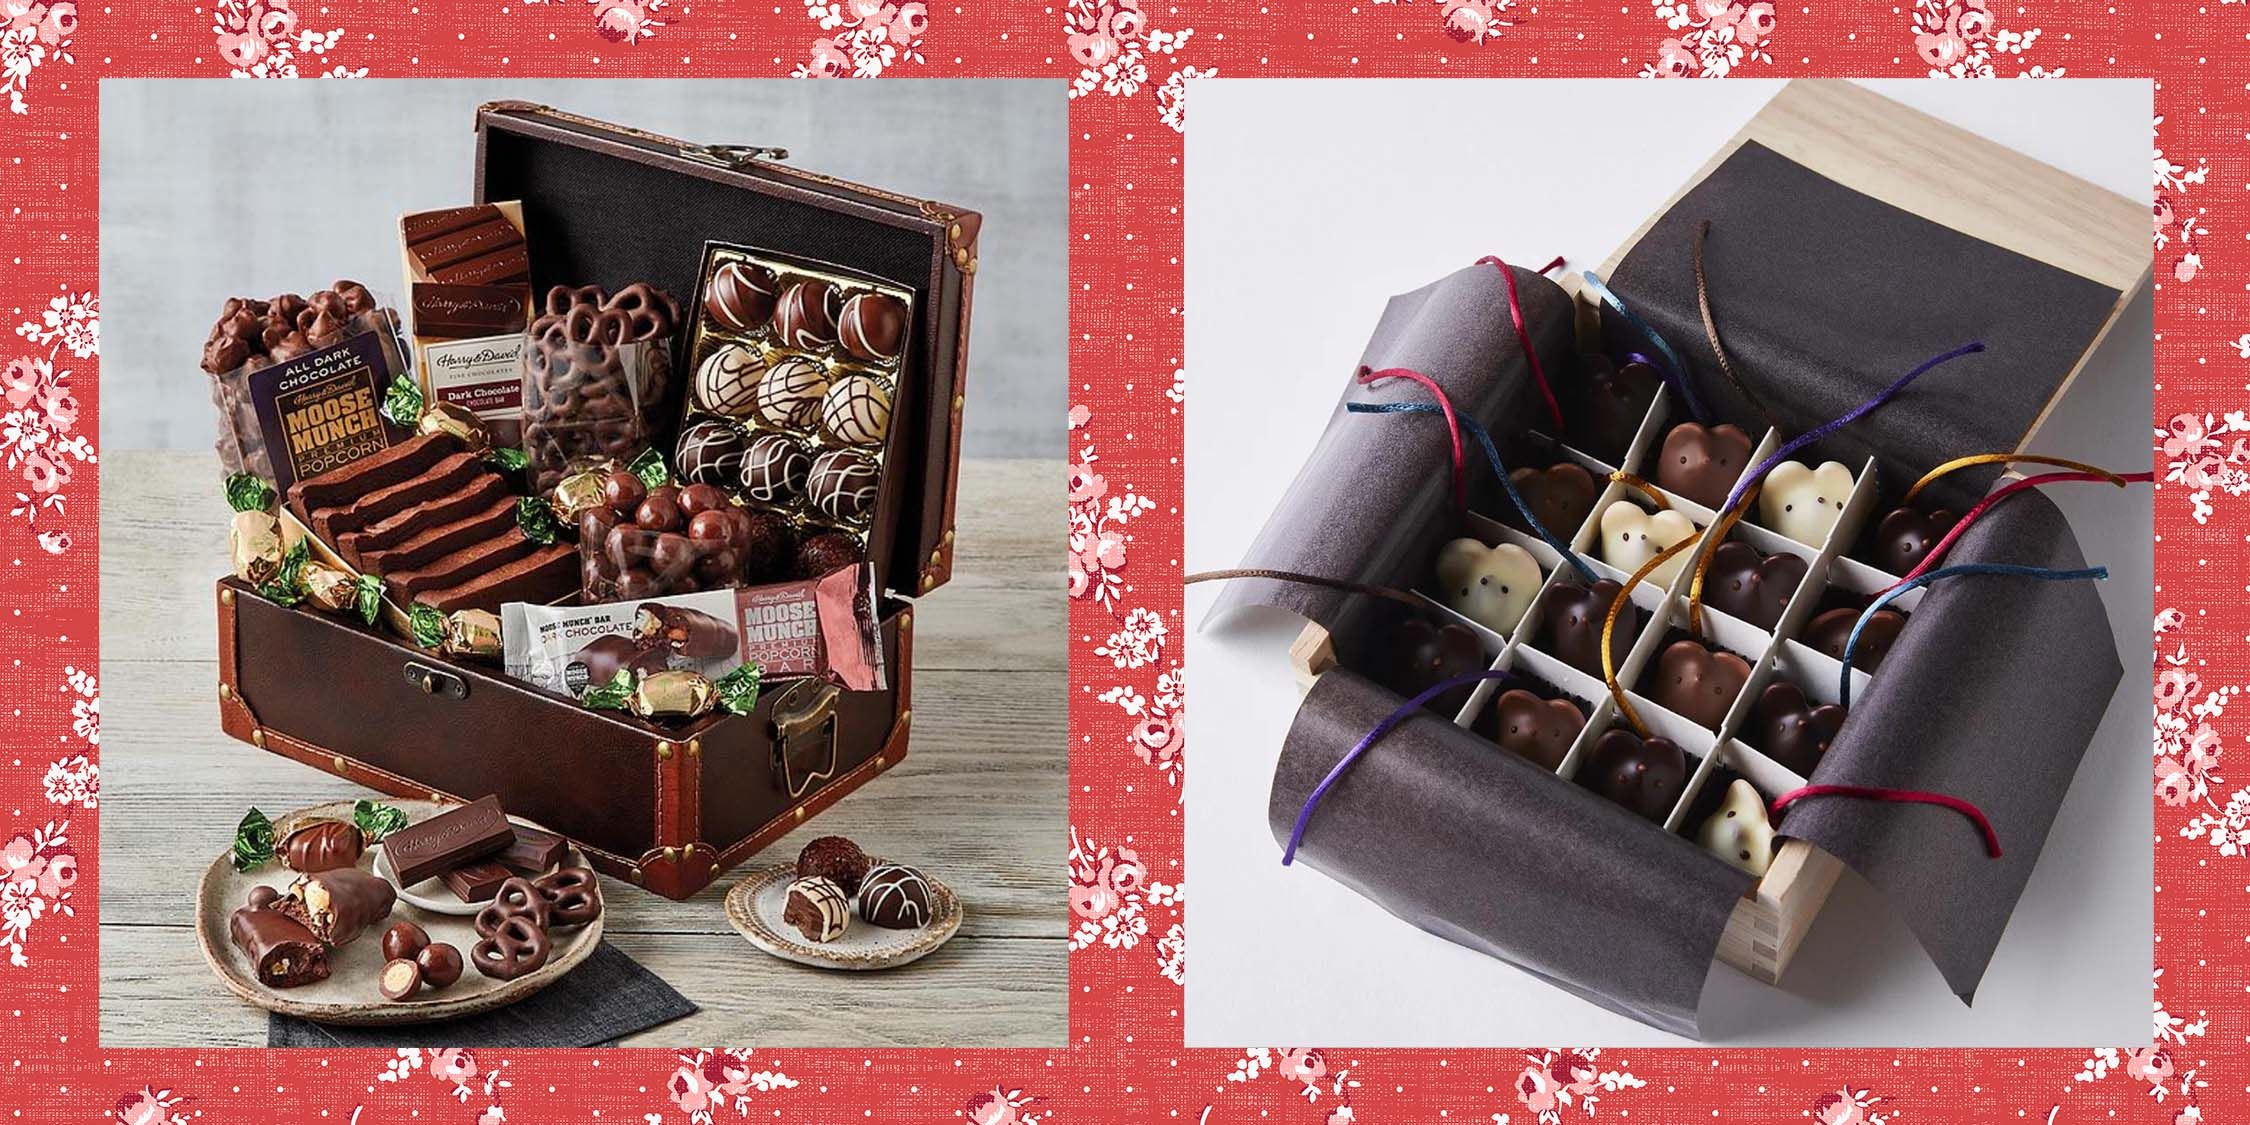 Chocolate Shavings: Gift Wrapping Ideas